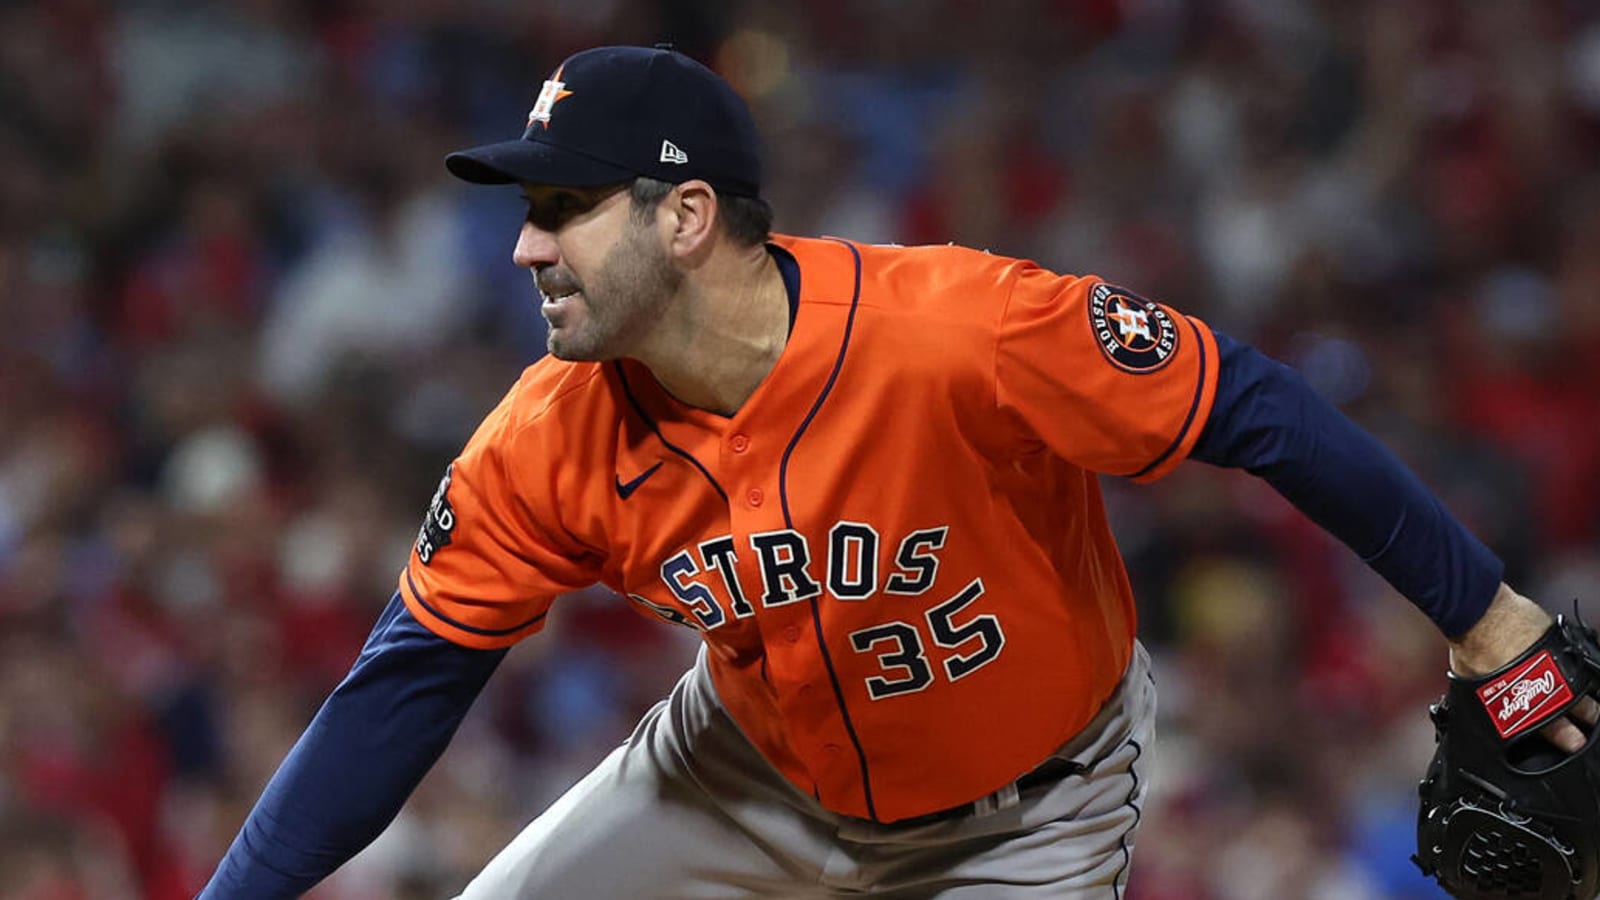 Watch: Justin Verlander gives up record 10th World Series HR